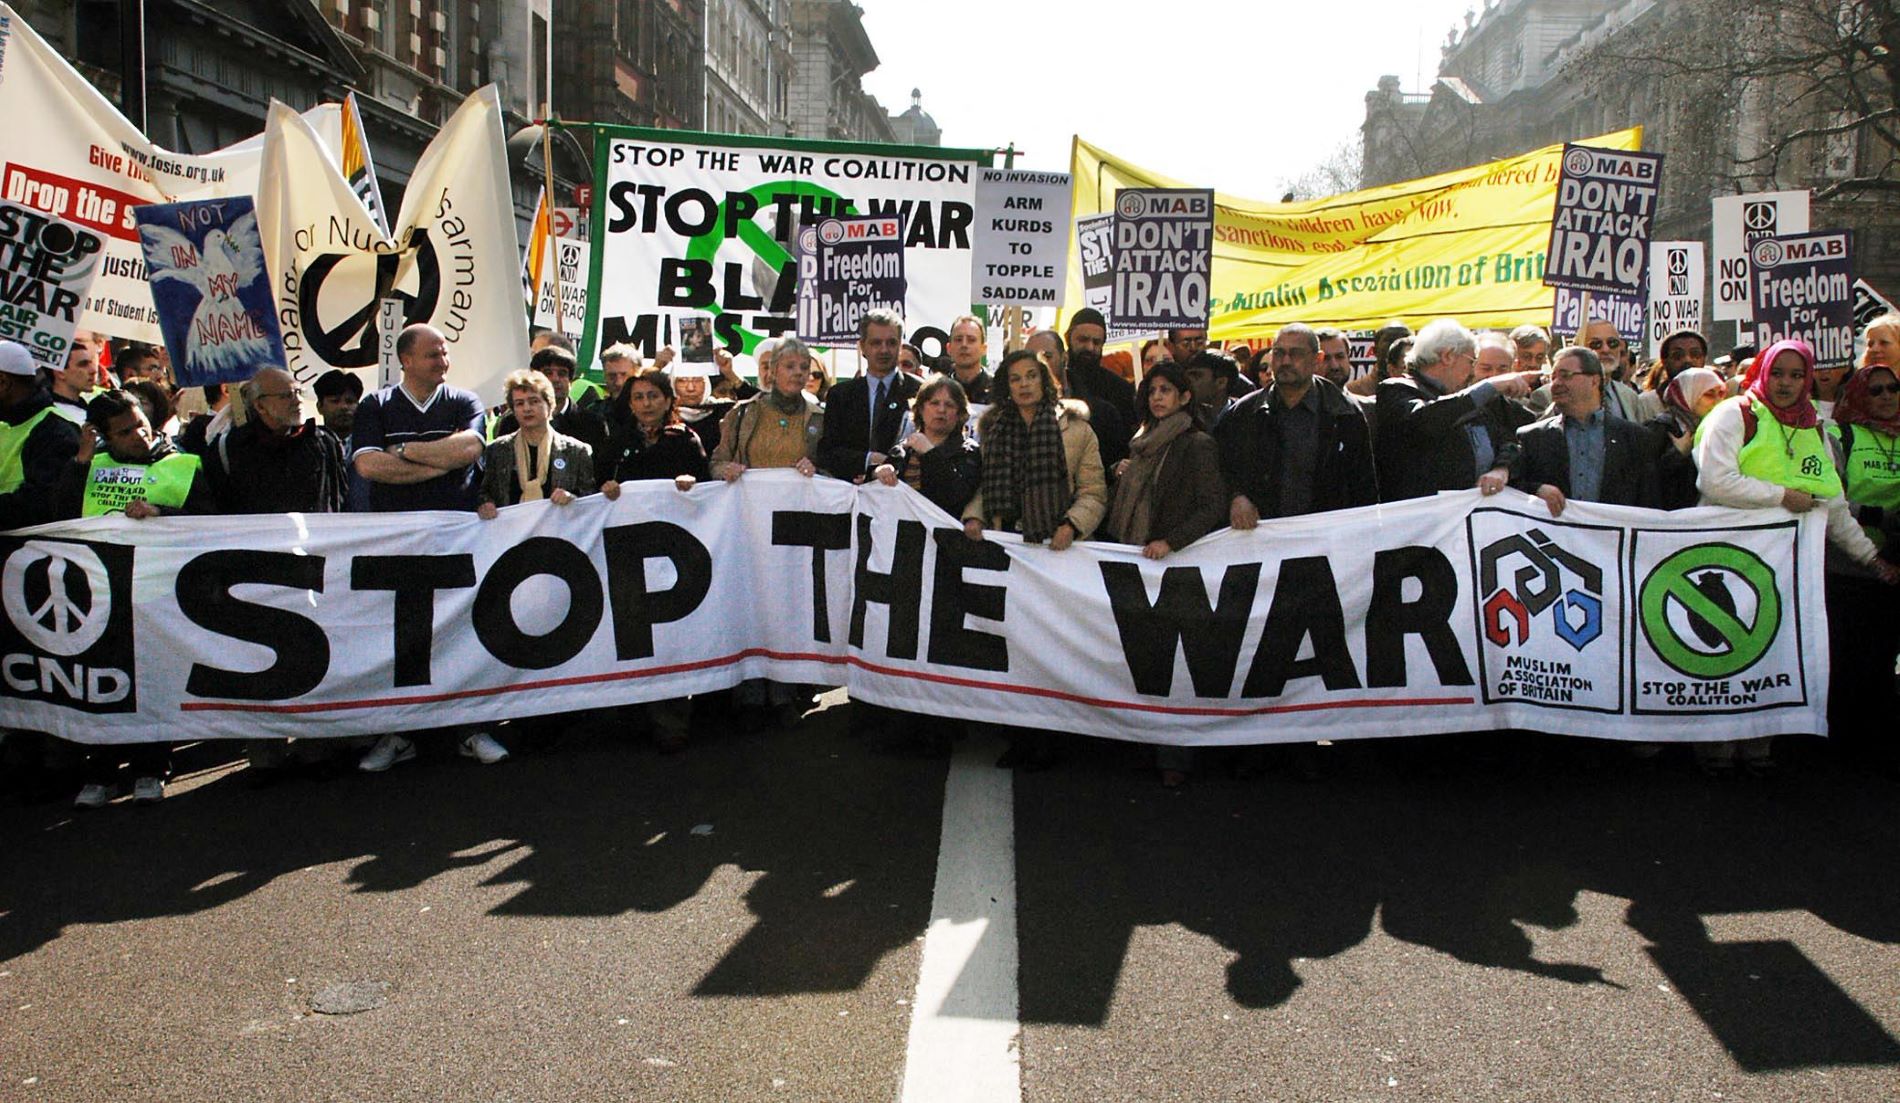 Anti-war protesters march down Whitehall in London, Britain, 22 March 2003, to demonstrate against the current military action on Iraq primarily by the British and United States governments (AFP)